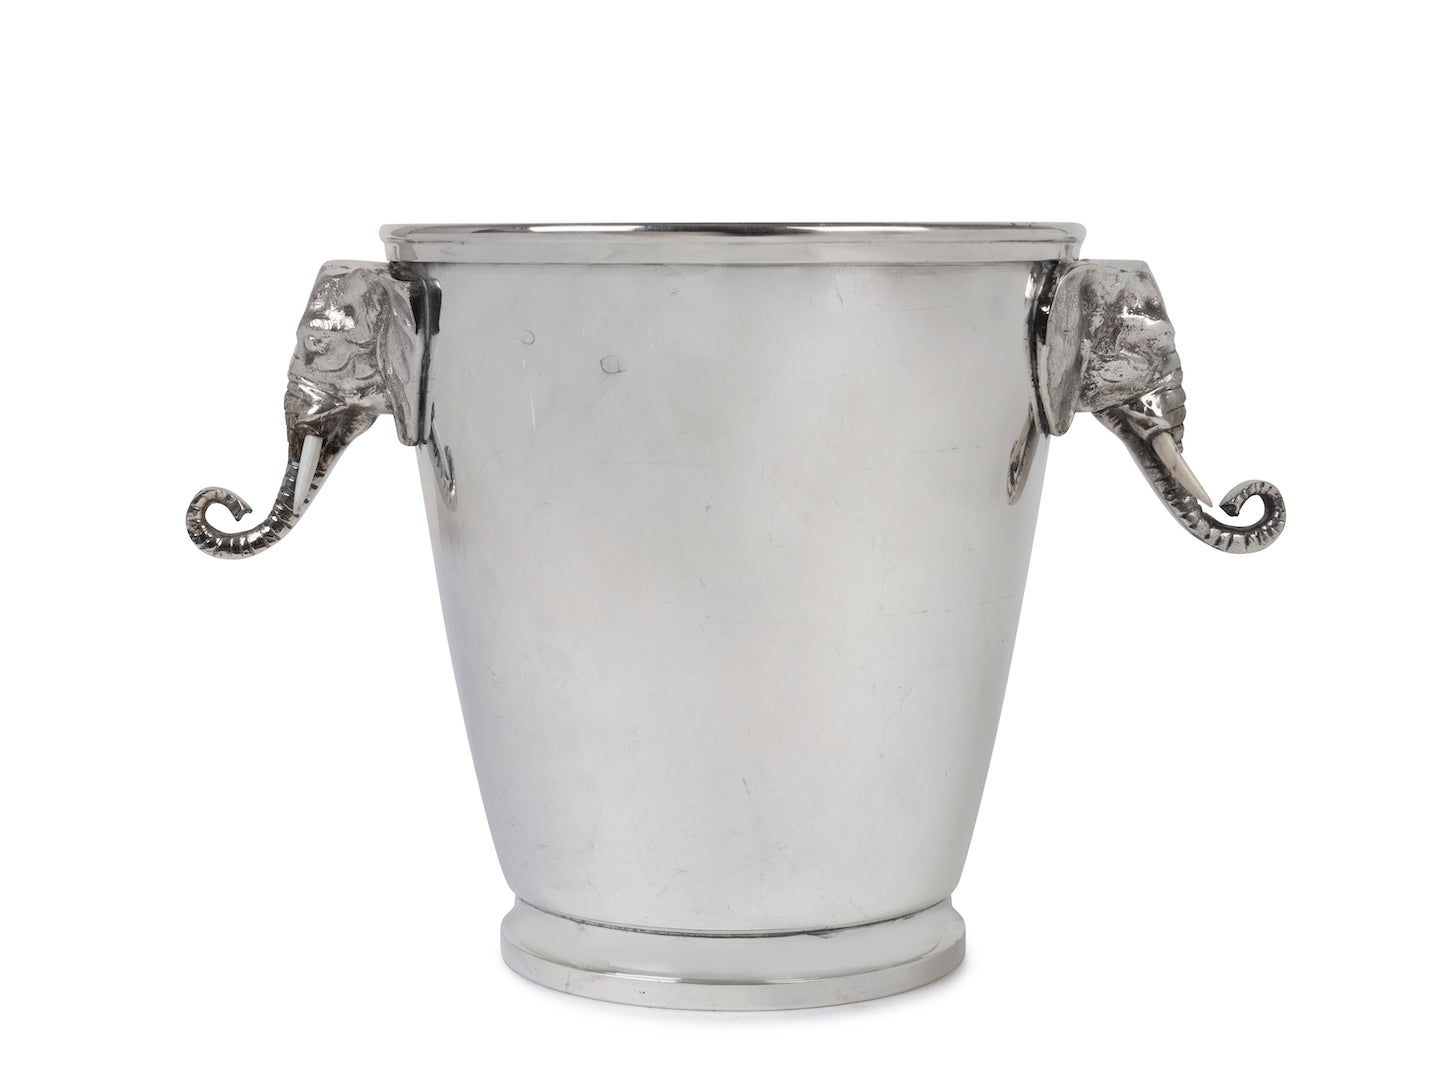 SOLD A good quality silver-plated elephant-head wine cooler, Italian Circa 1950